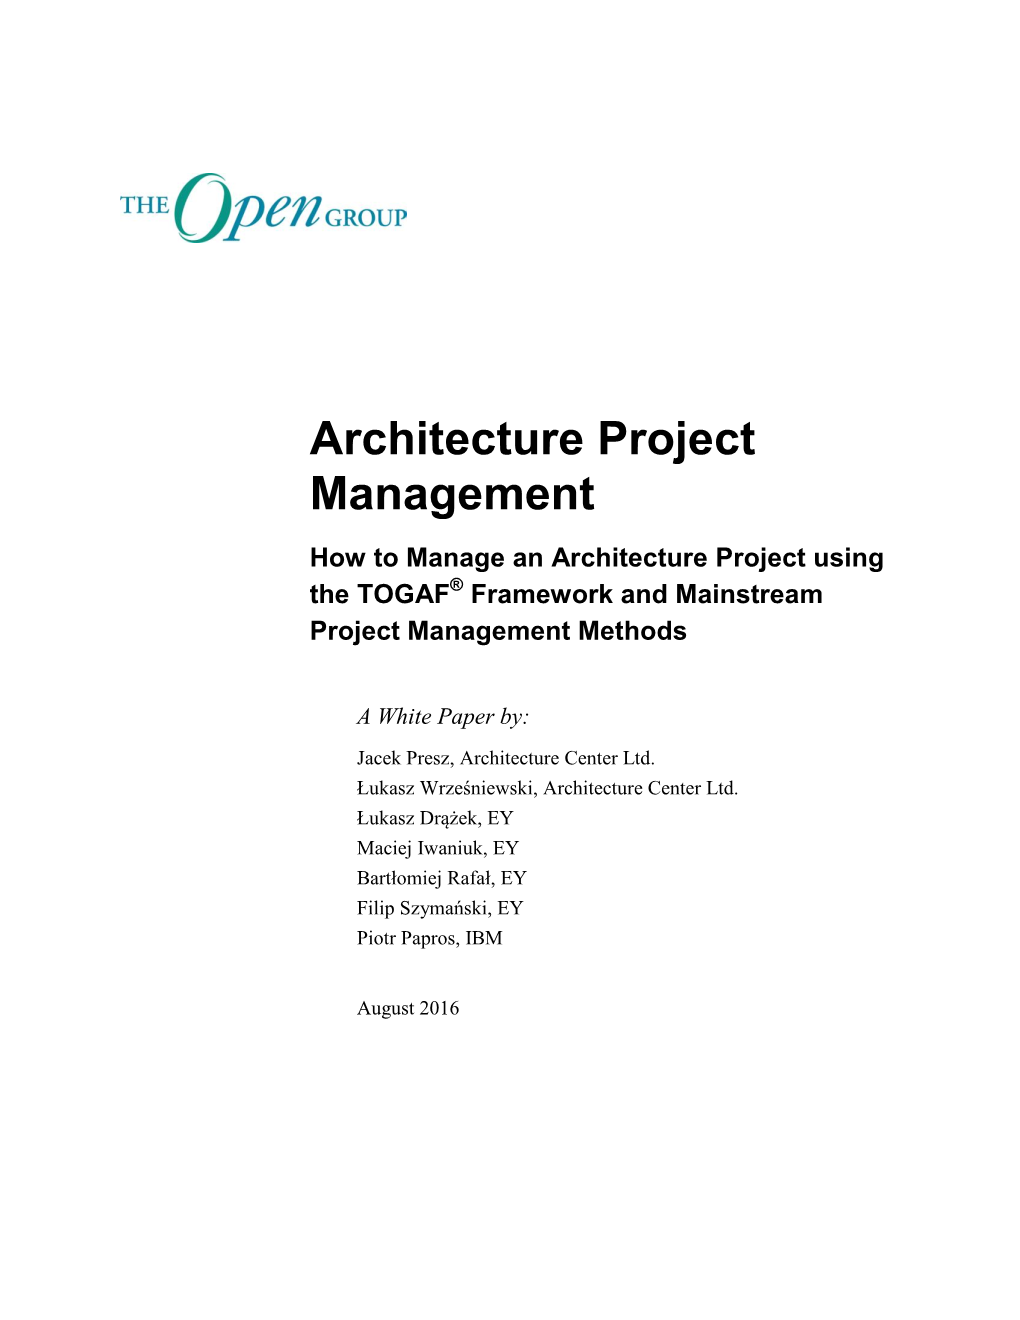 Architecture Project Mgmt WP